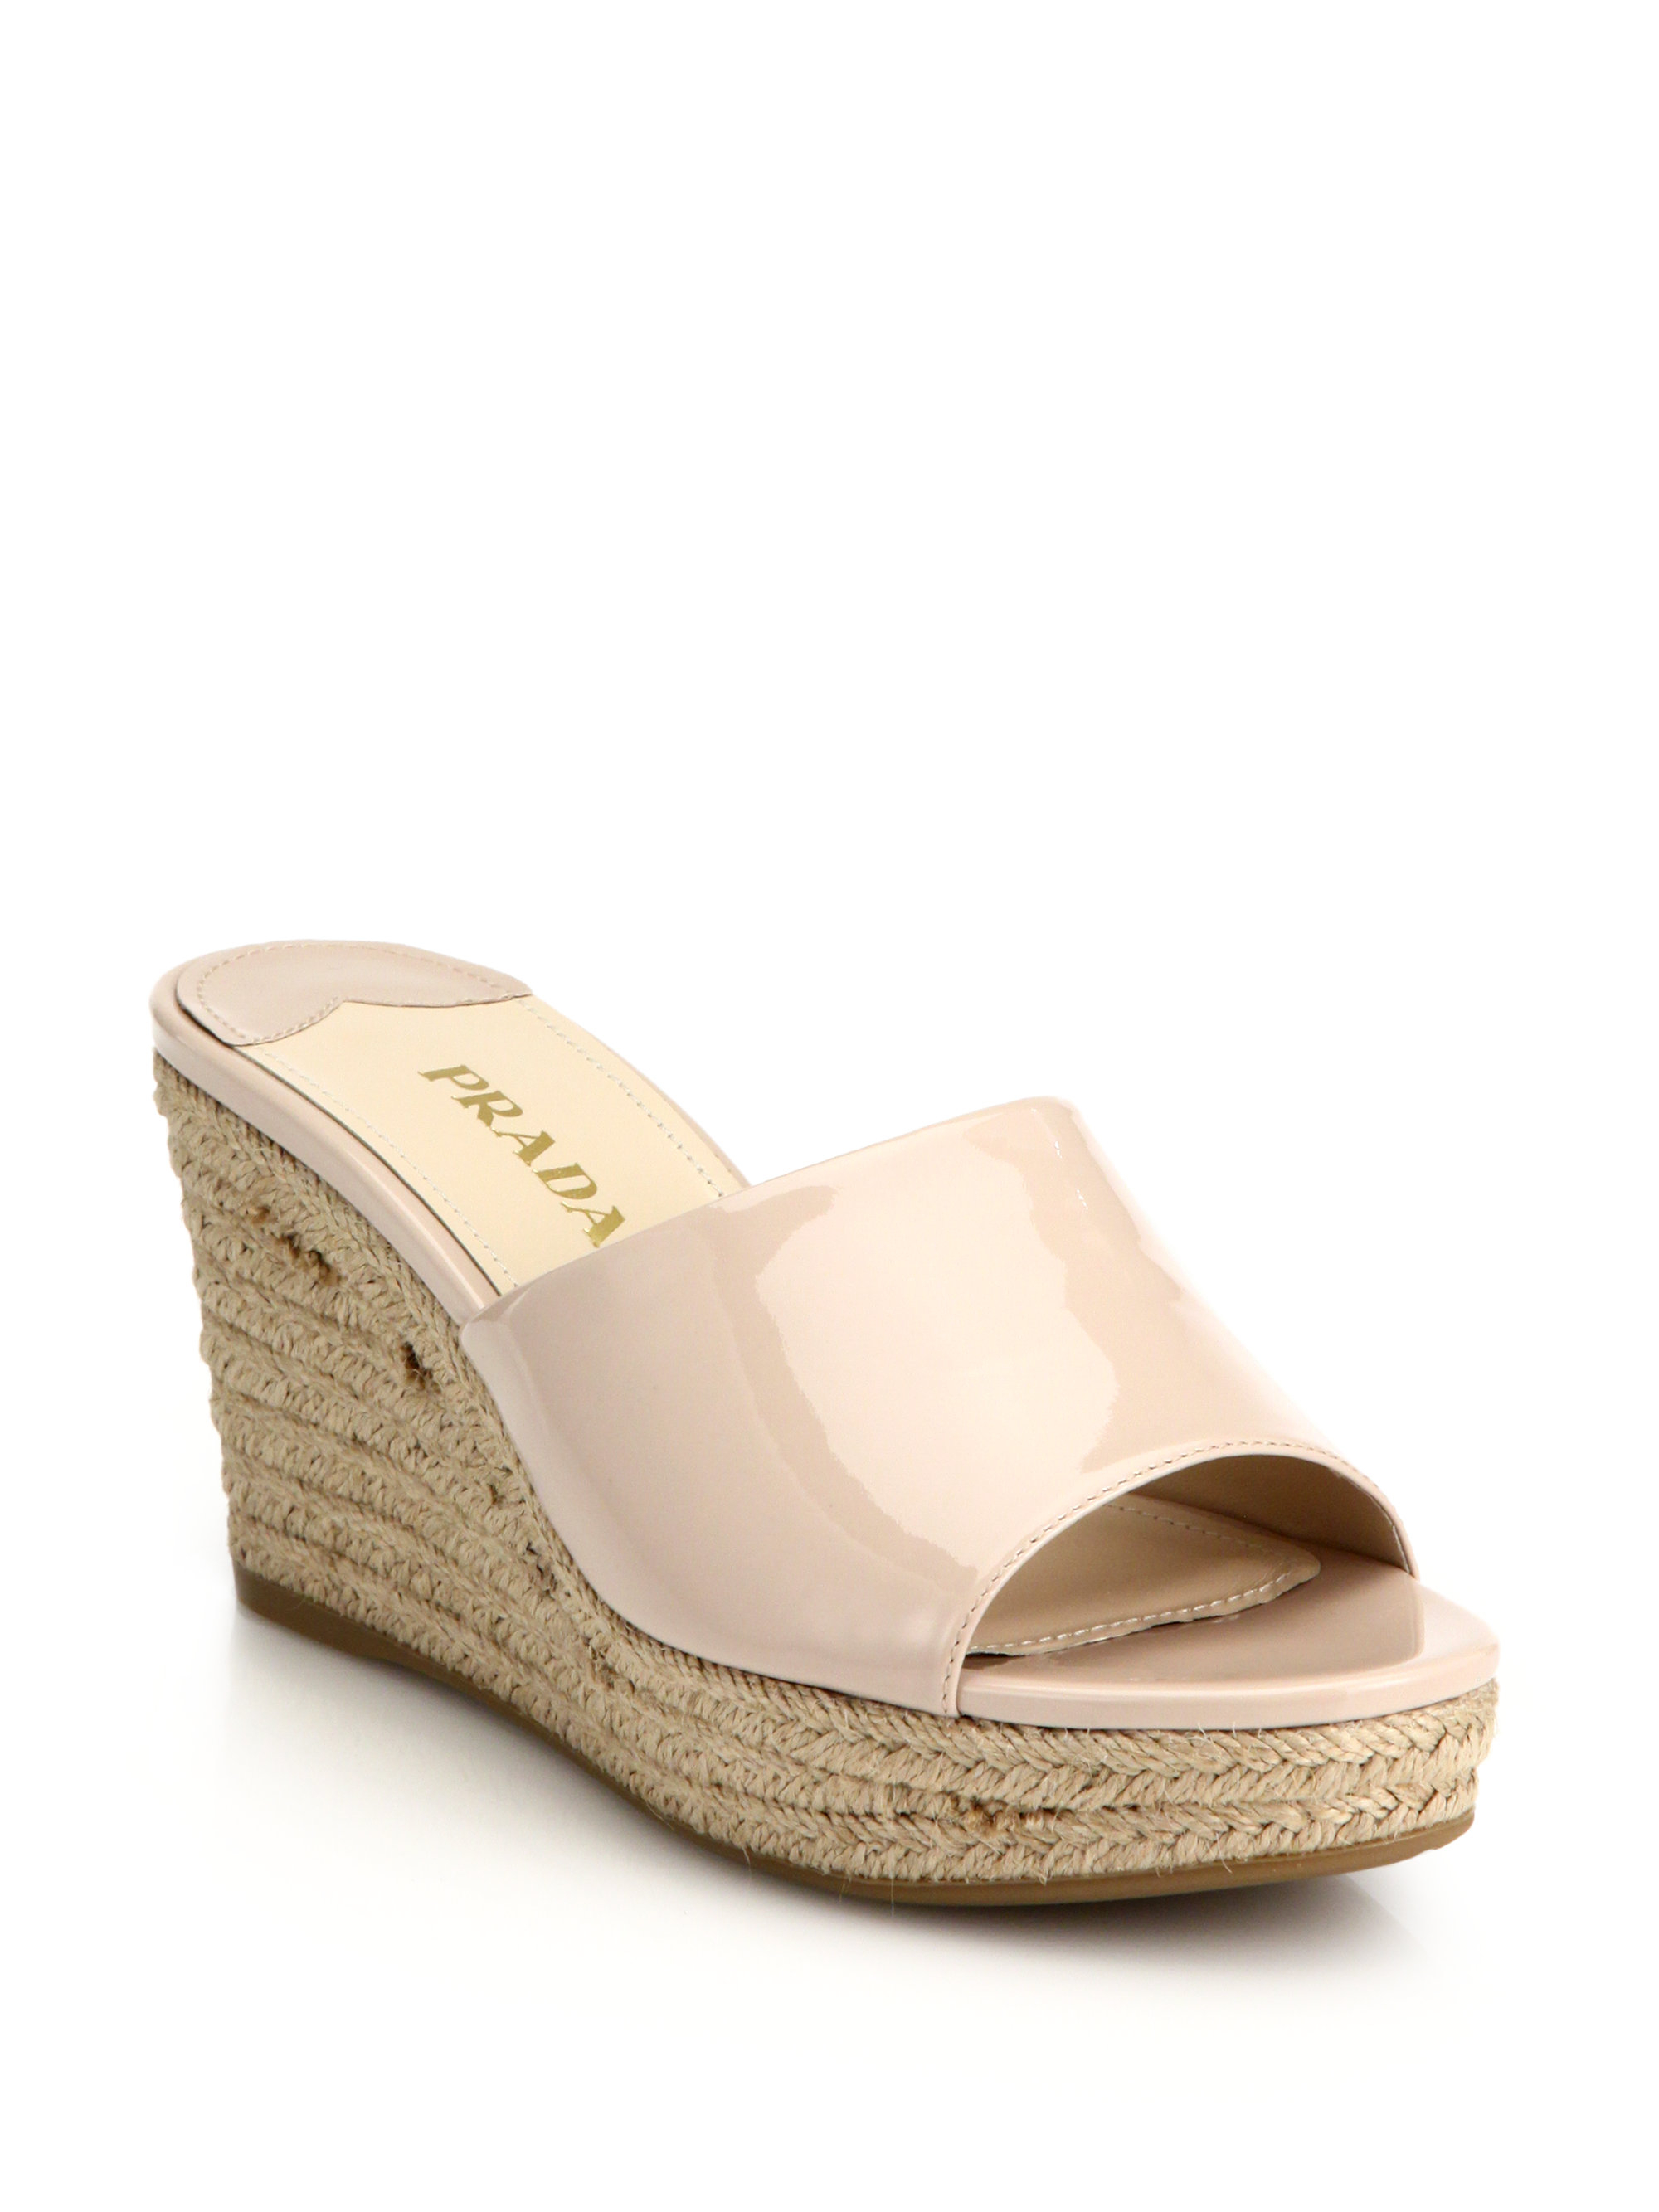 Lyst - Prada Patent Leather Espadrille Wedge Mule Sandals in Pink